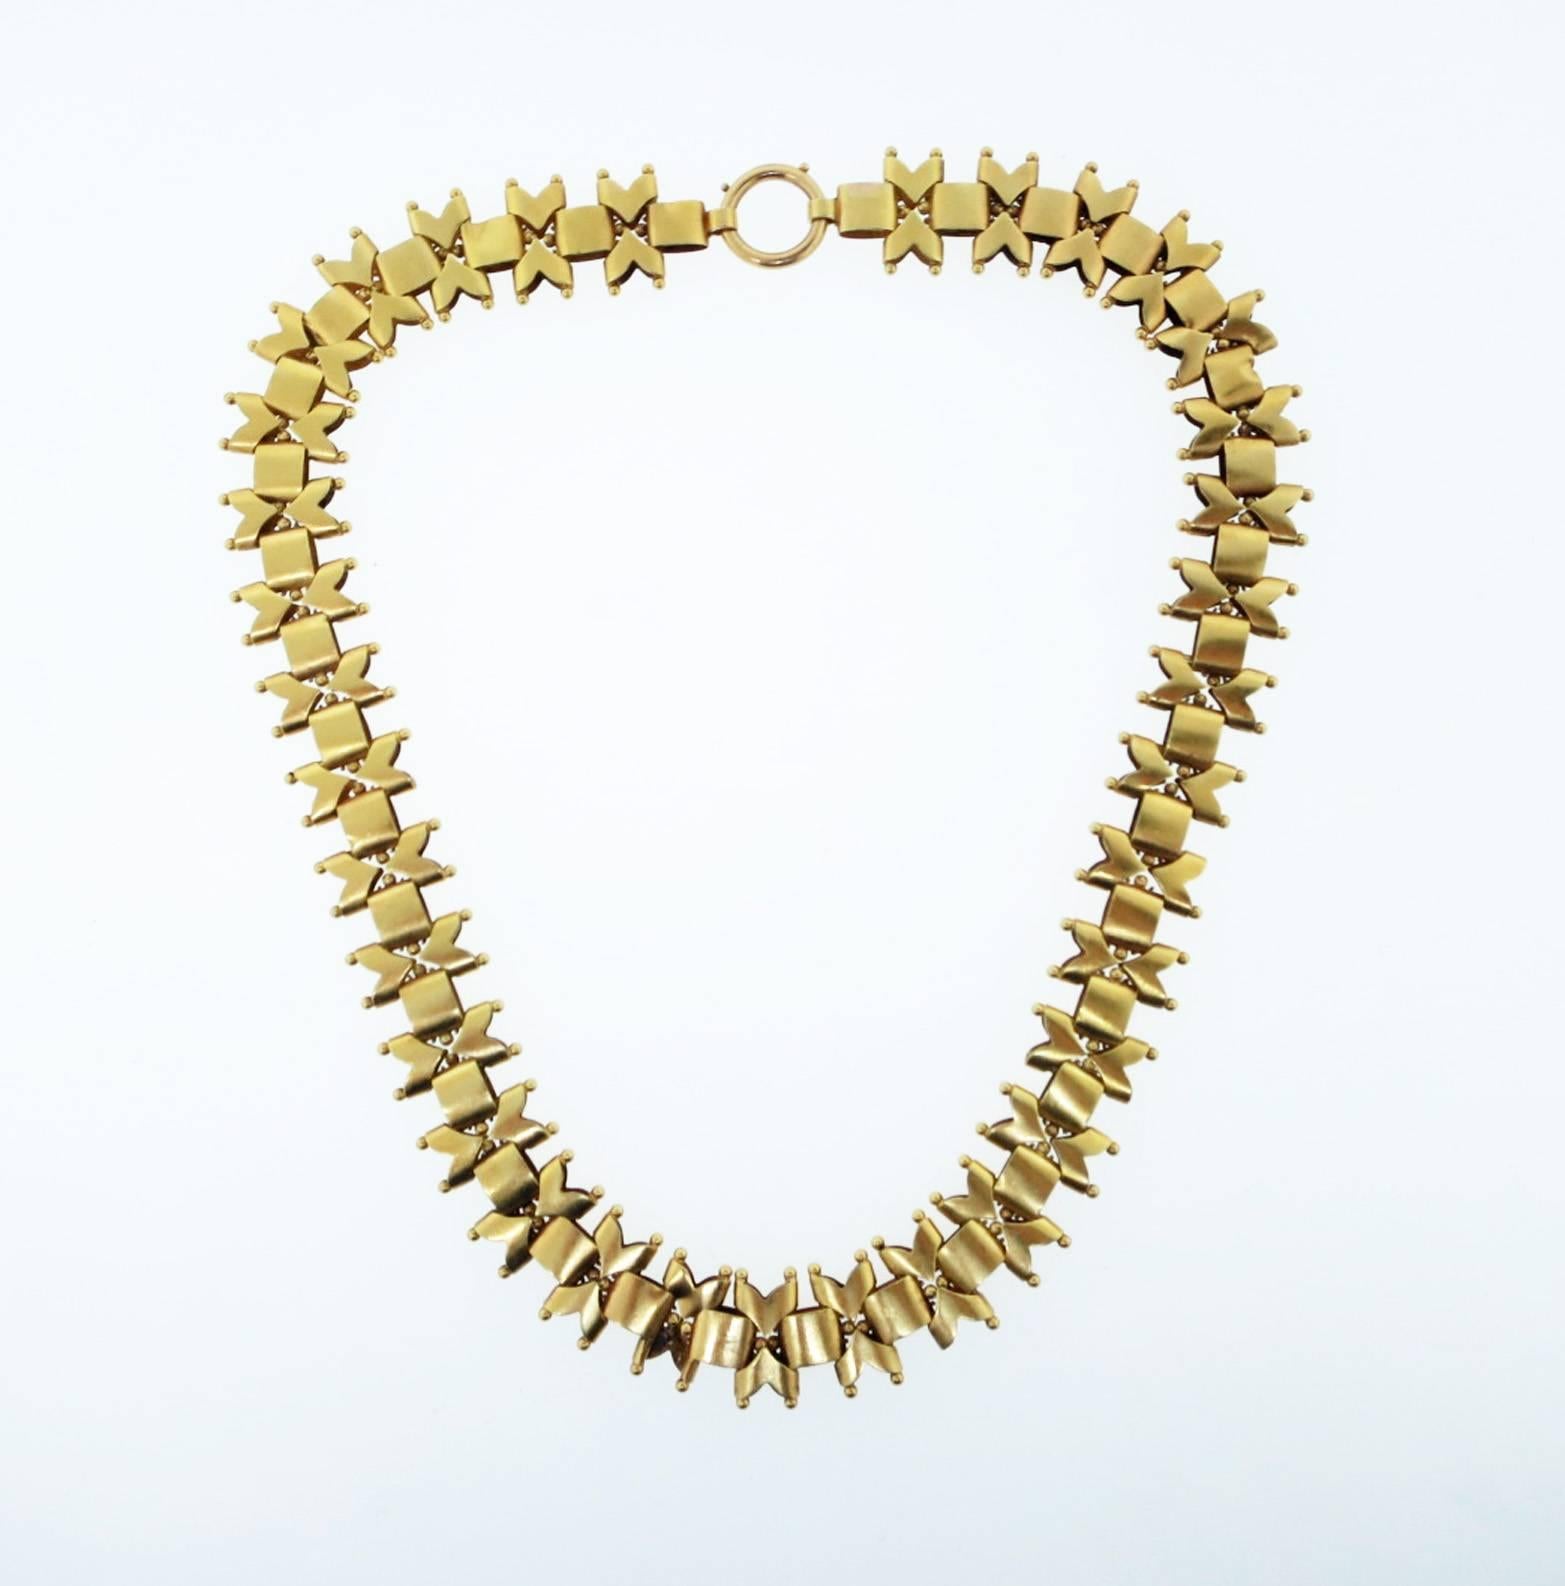 Intricate and bold softly finished  14kt. yellow gold link Victorian necklace measuring 18 inches in length and 3/4 inches in width with granulation detail circa 1880.